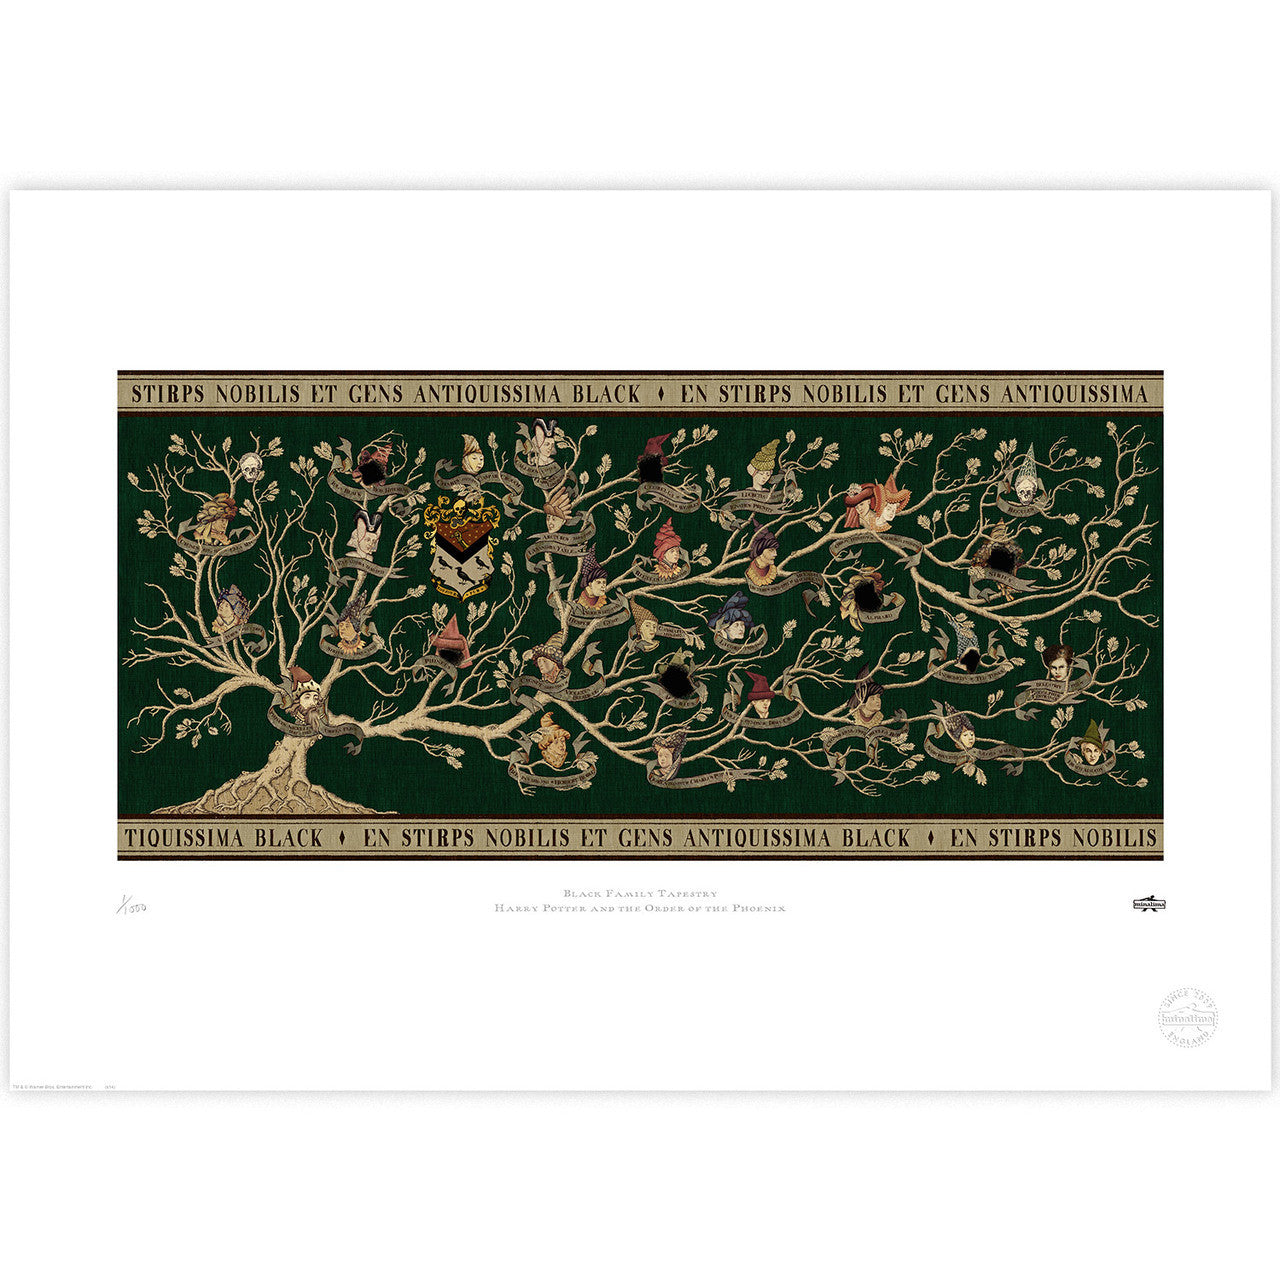 Black Family Tapestry Limited Edition Art Print